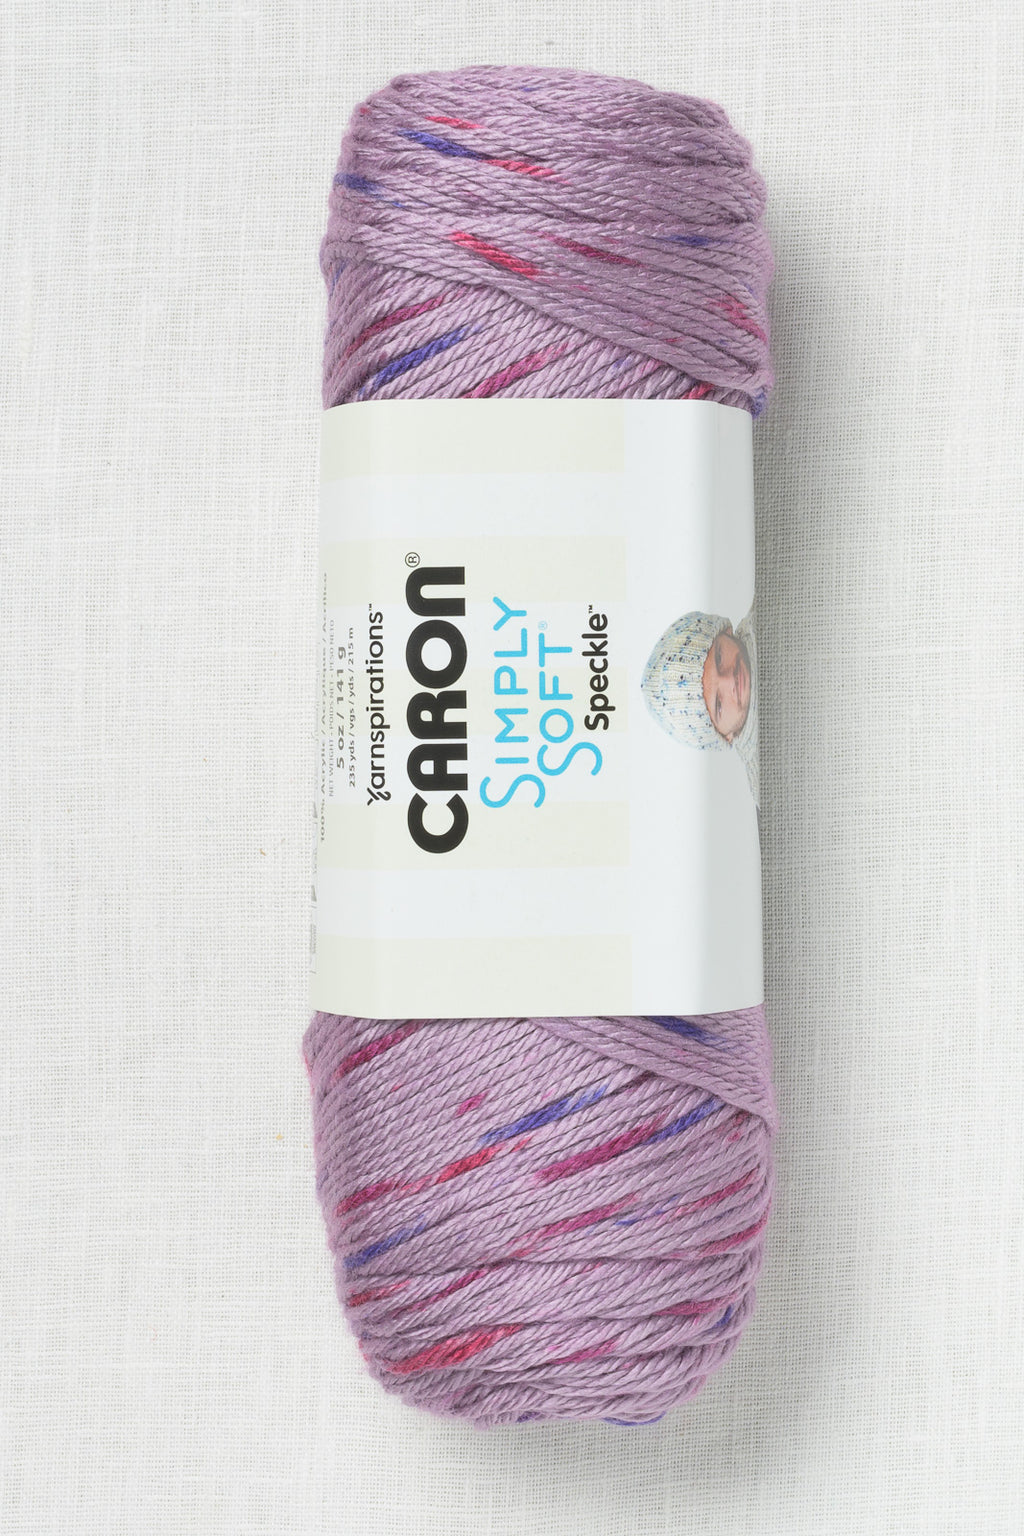 Caron Simply Soft Prints & Ombres Snapdragon